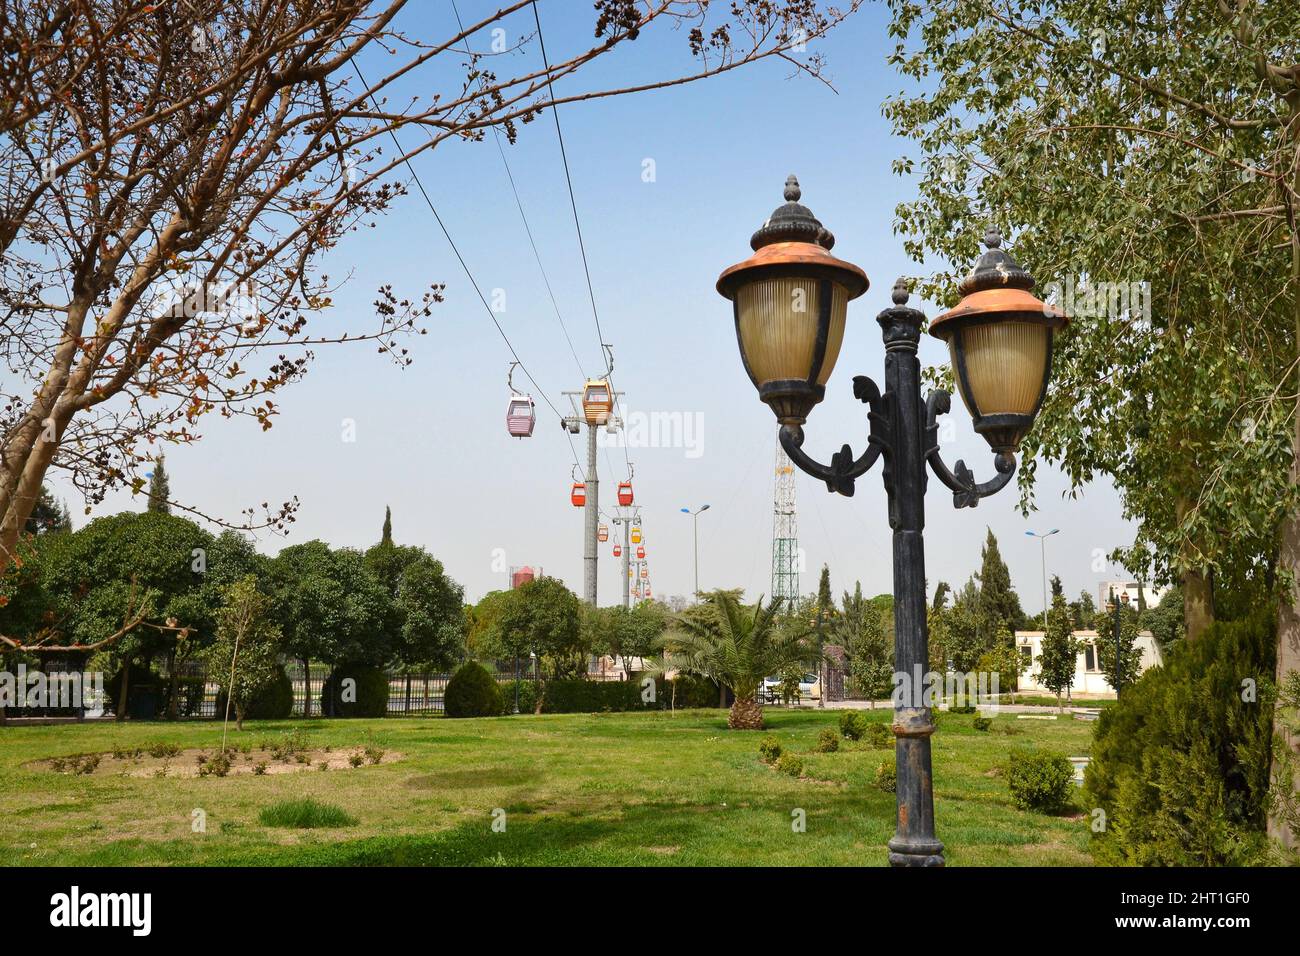 Cable car connecting Minare Park and Shanidar Park 2 in the city of Erbil in Kurdish Iraq. Stock Photo